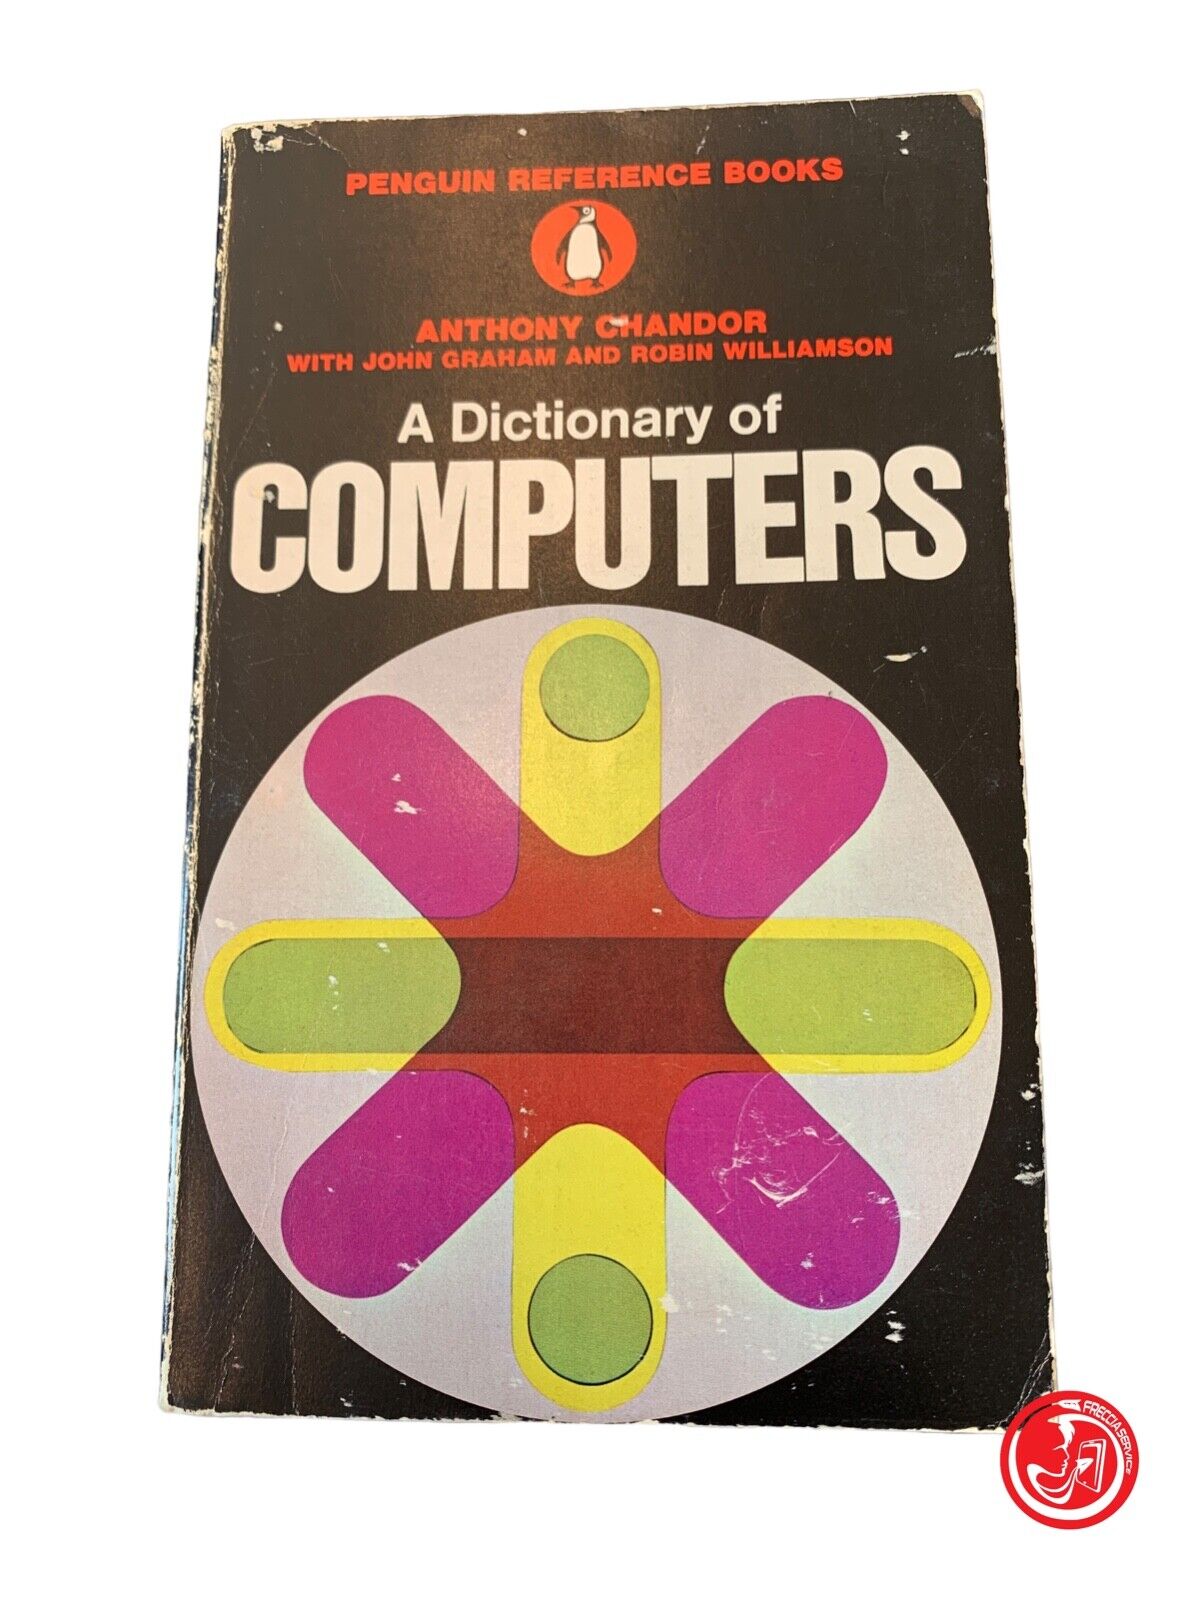 A Dictionary of Computers - Anthony Chandor - Penguin Books 1970